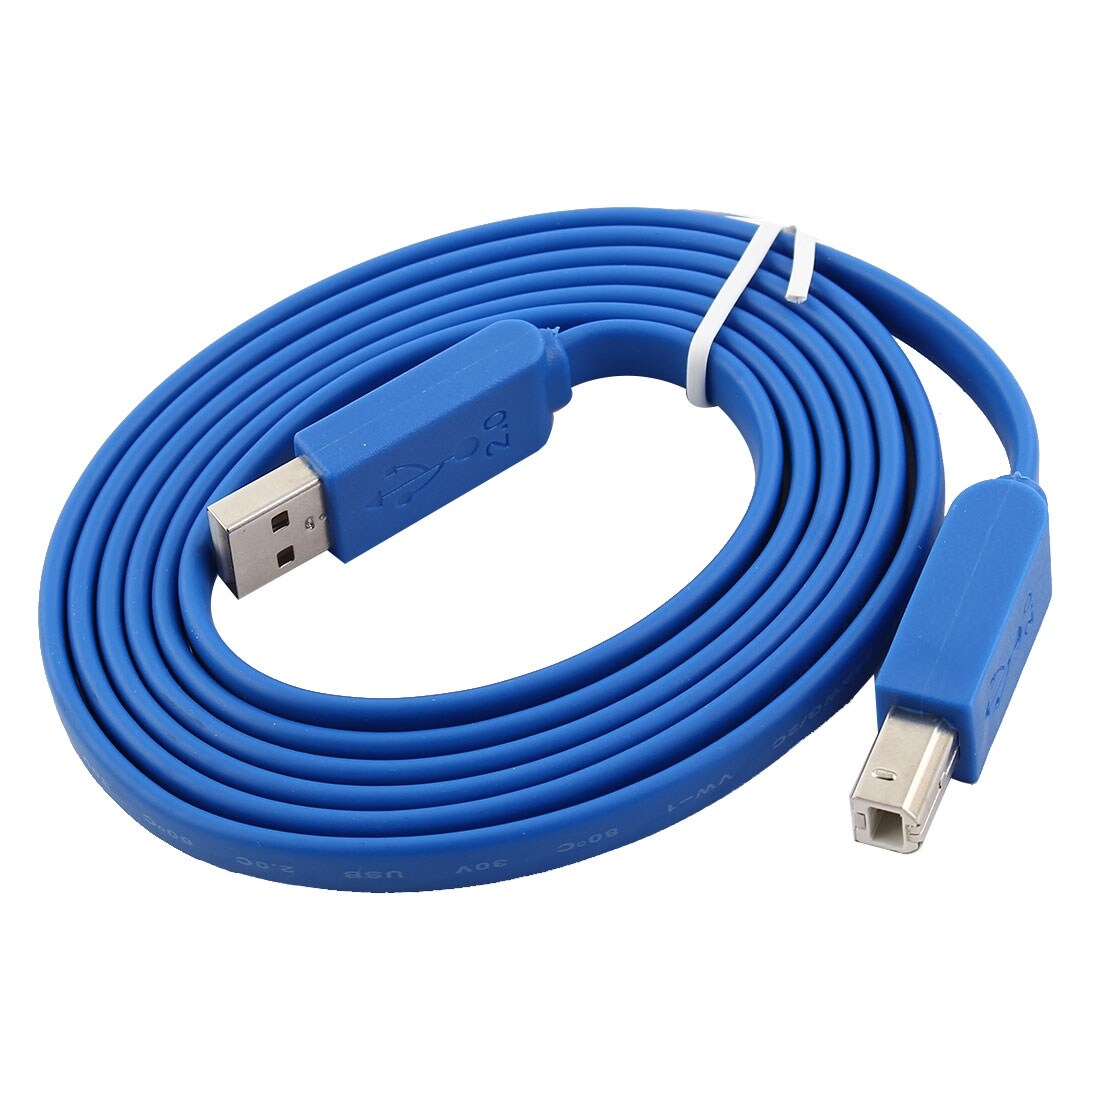 High Speed USB 2.0 A Male to B Male Data Transfer Printer Cable Cord Pip US